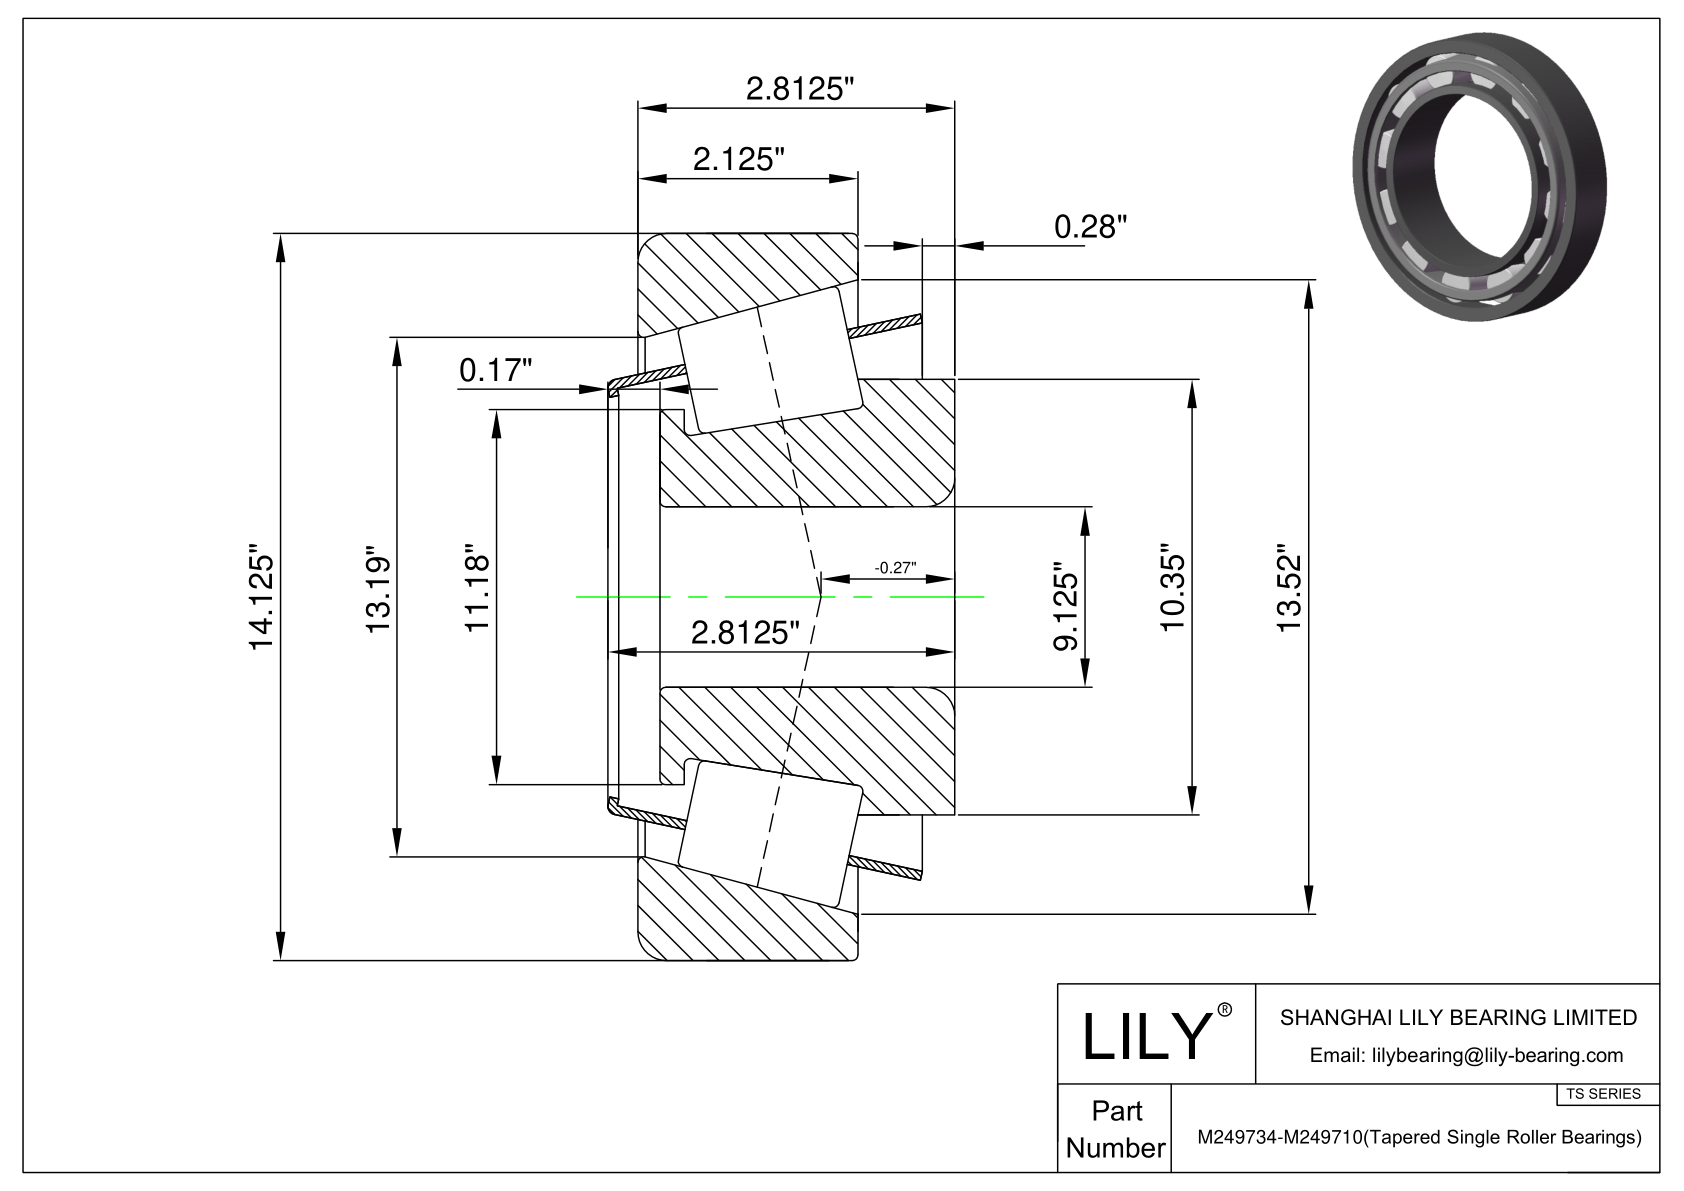 M249734-M249710 TS (Tapered Single Roller Bearings) (Imperial) cad drawing